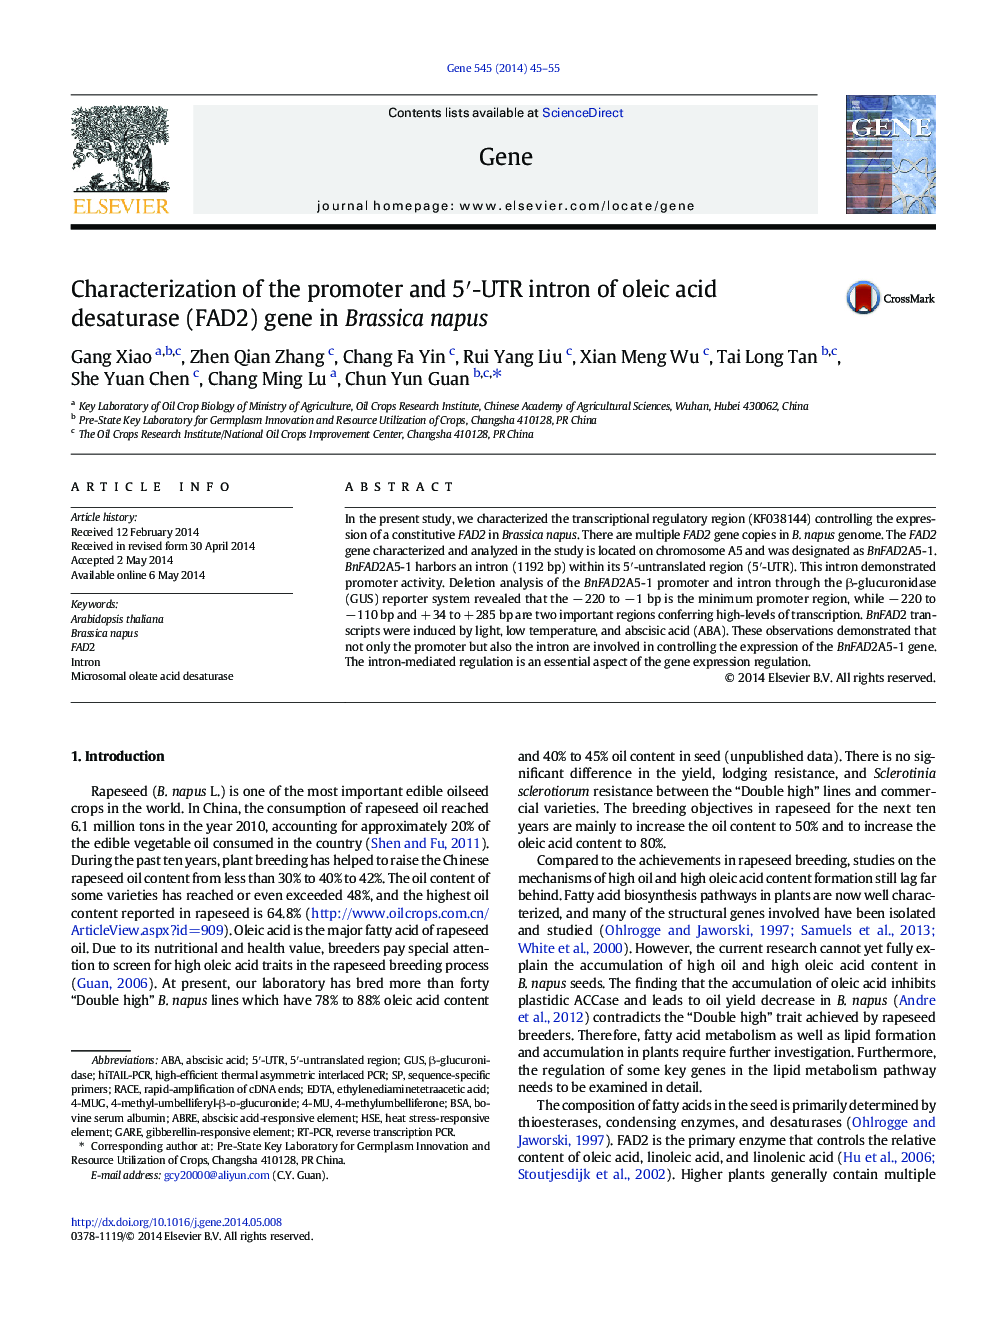 Characterization of the promoter and 5′-UTR intron of oleic acid desaturase (FAD2) gene in Brassica napus